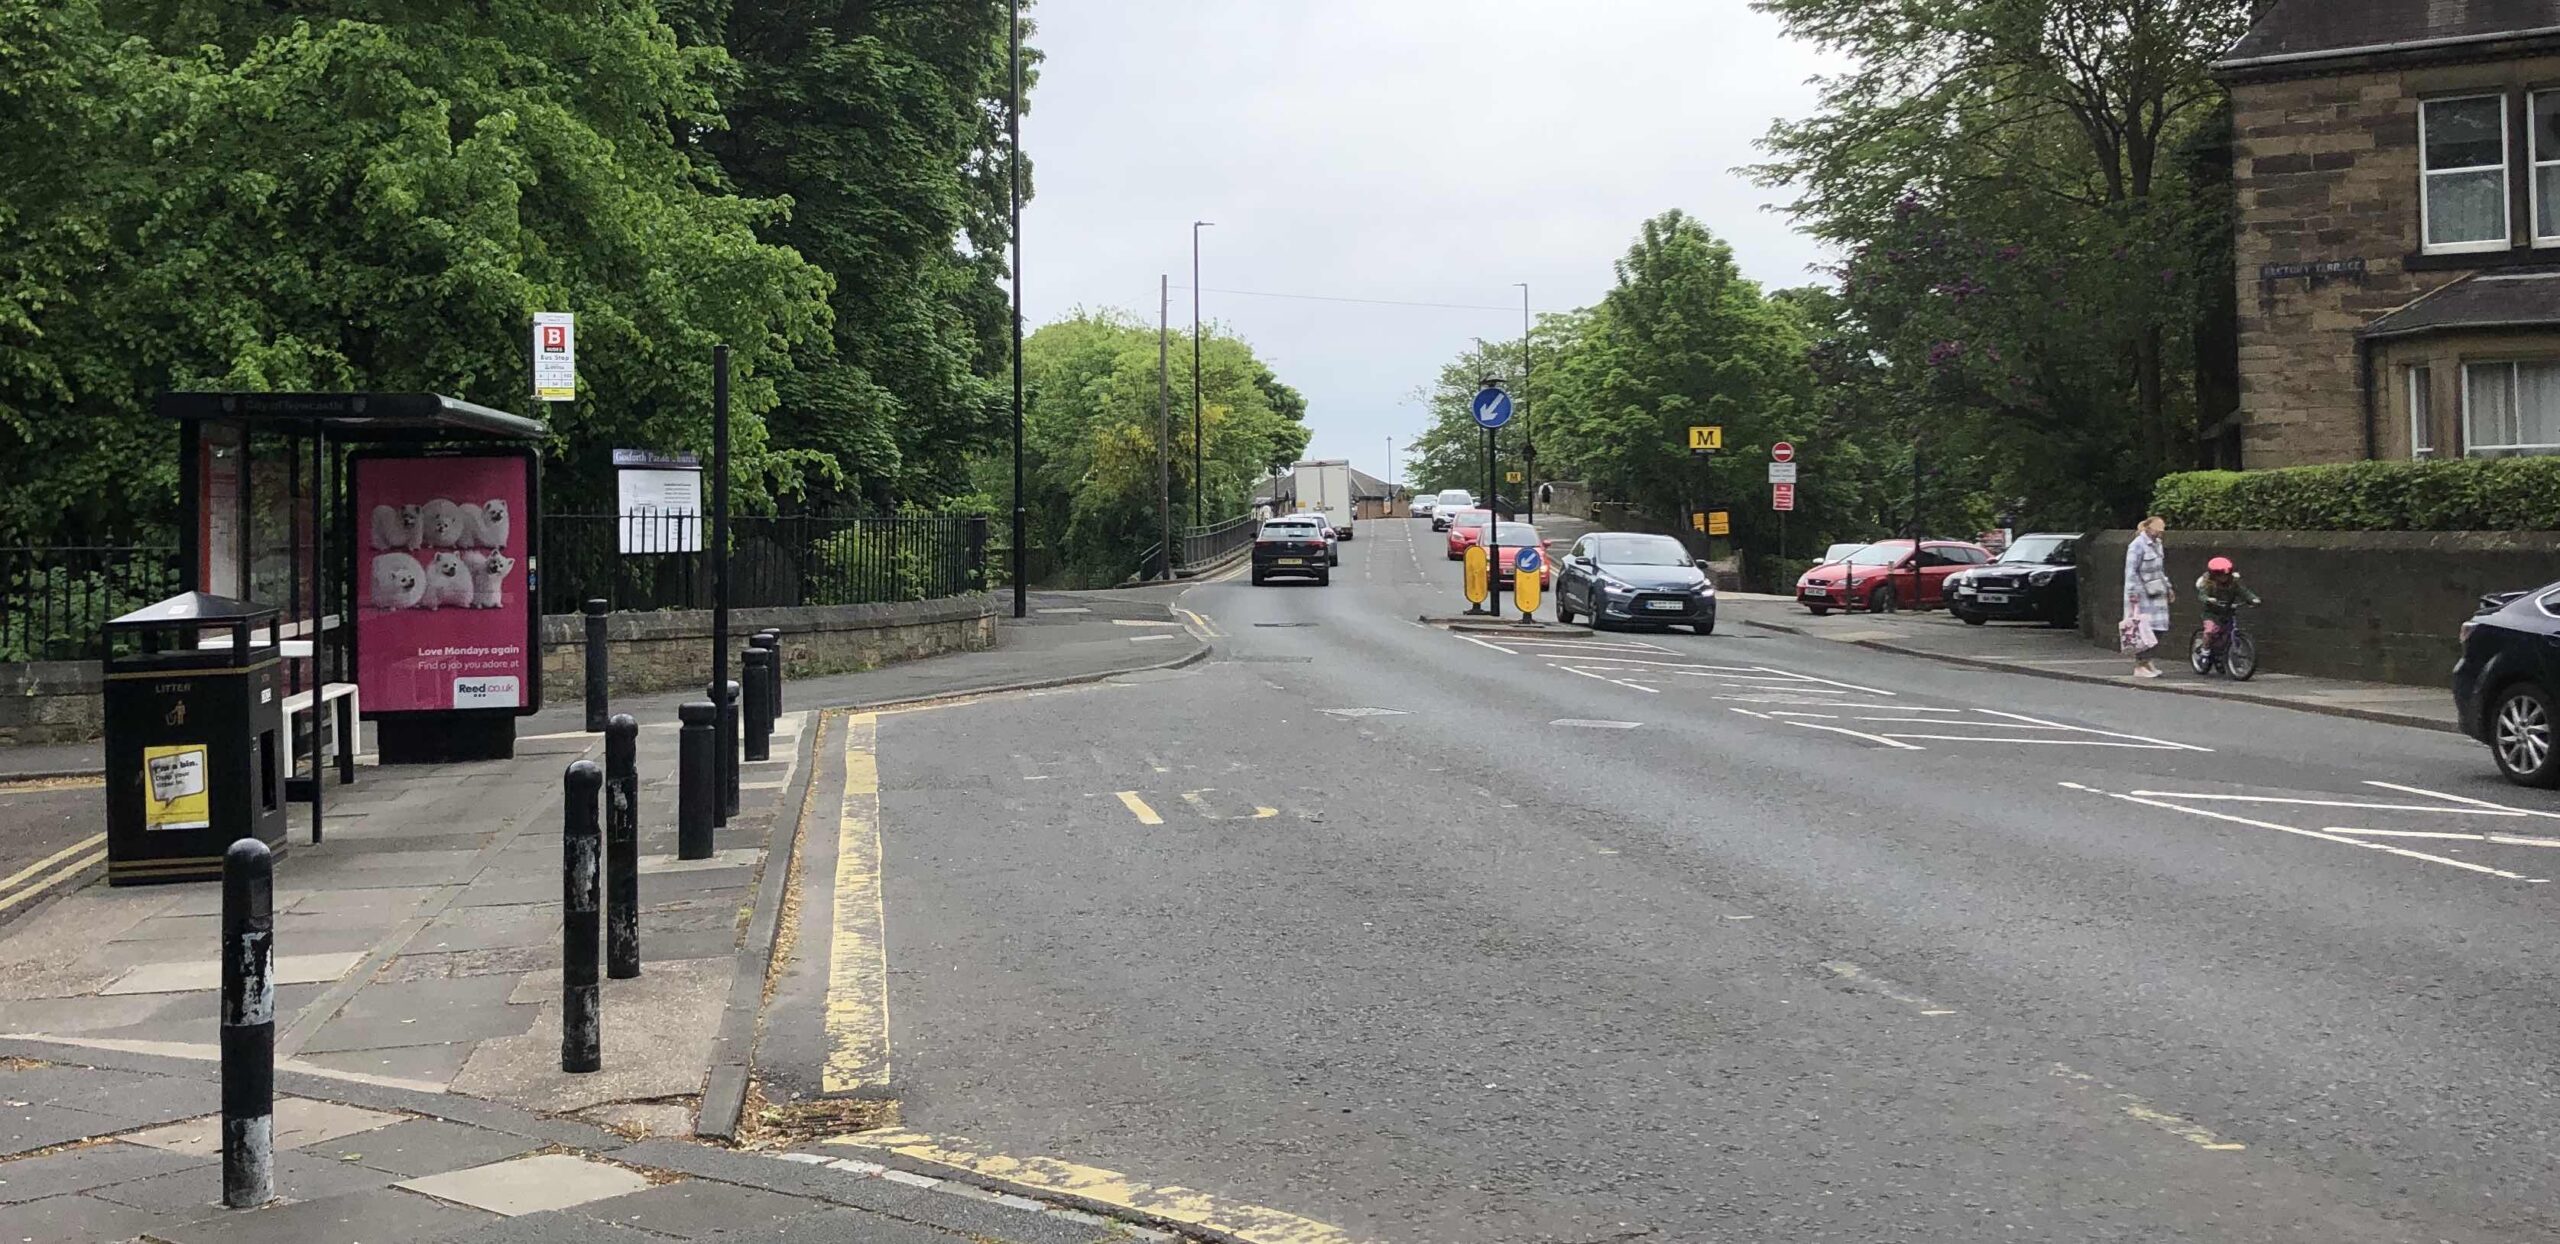 Picture of Station Road looking towards South Gosforth Metro. On the left is a bus stop over the end of Church Road that prevents vehicles entering or exiting. 